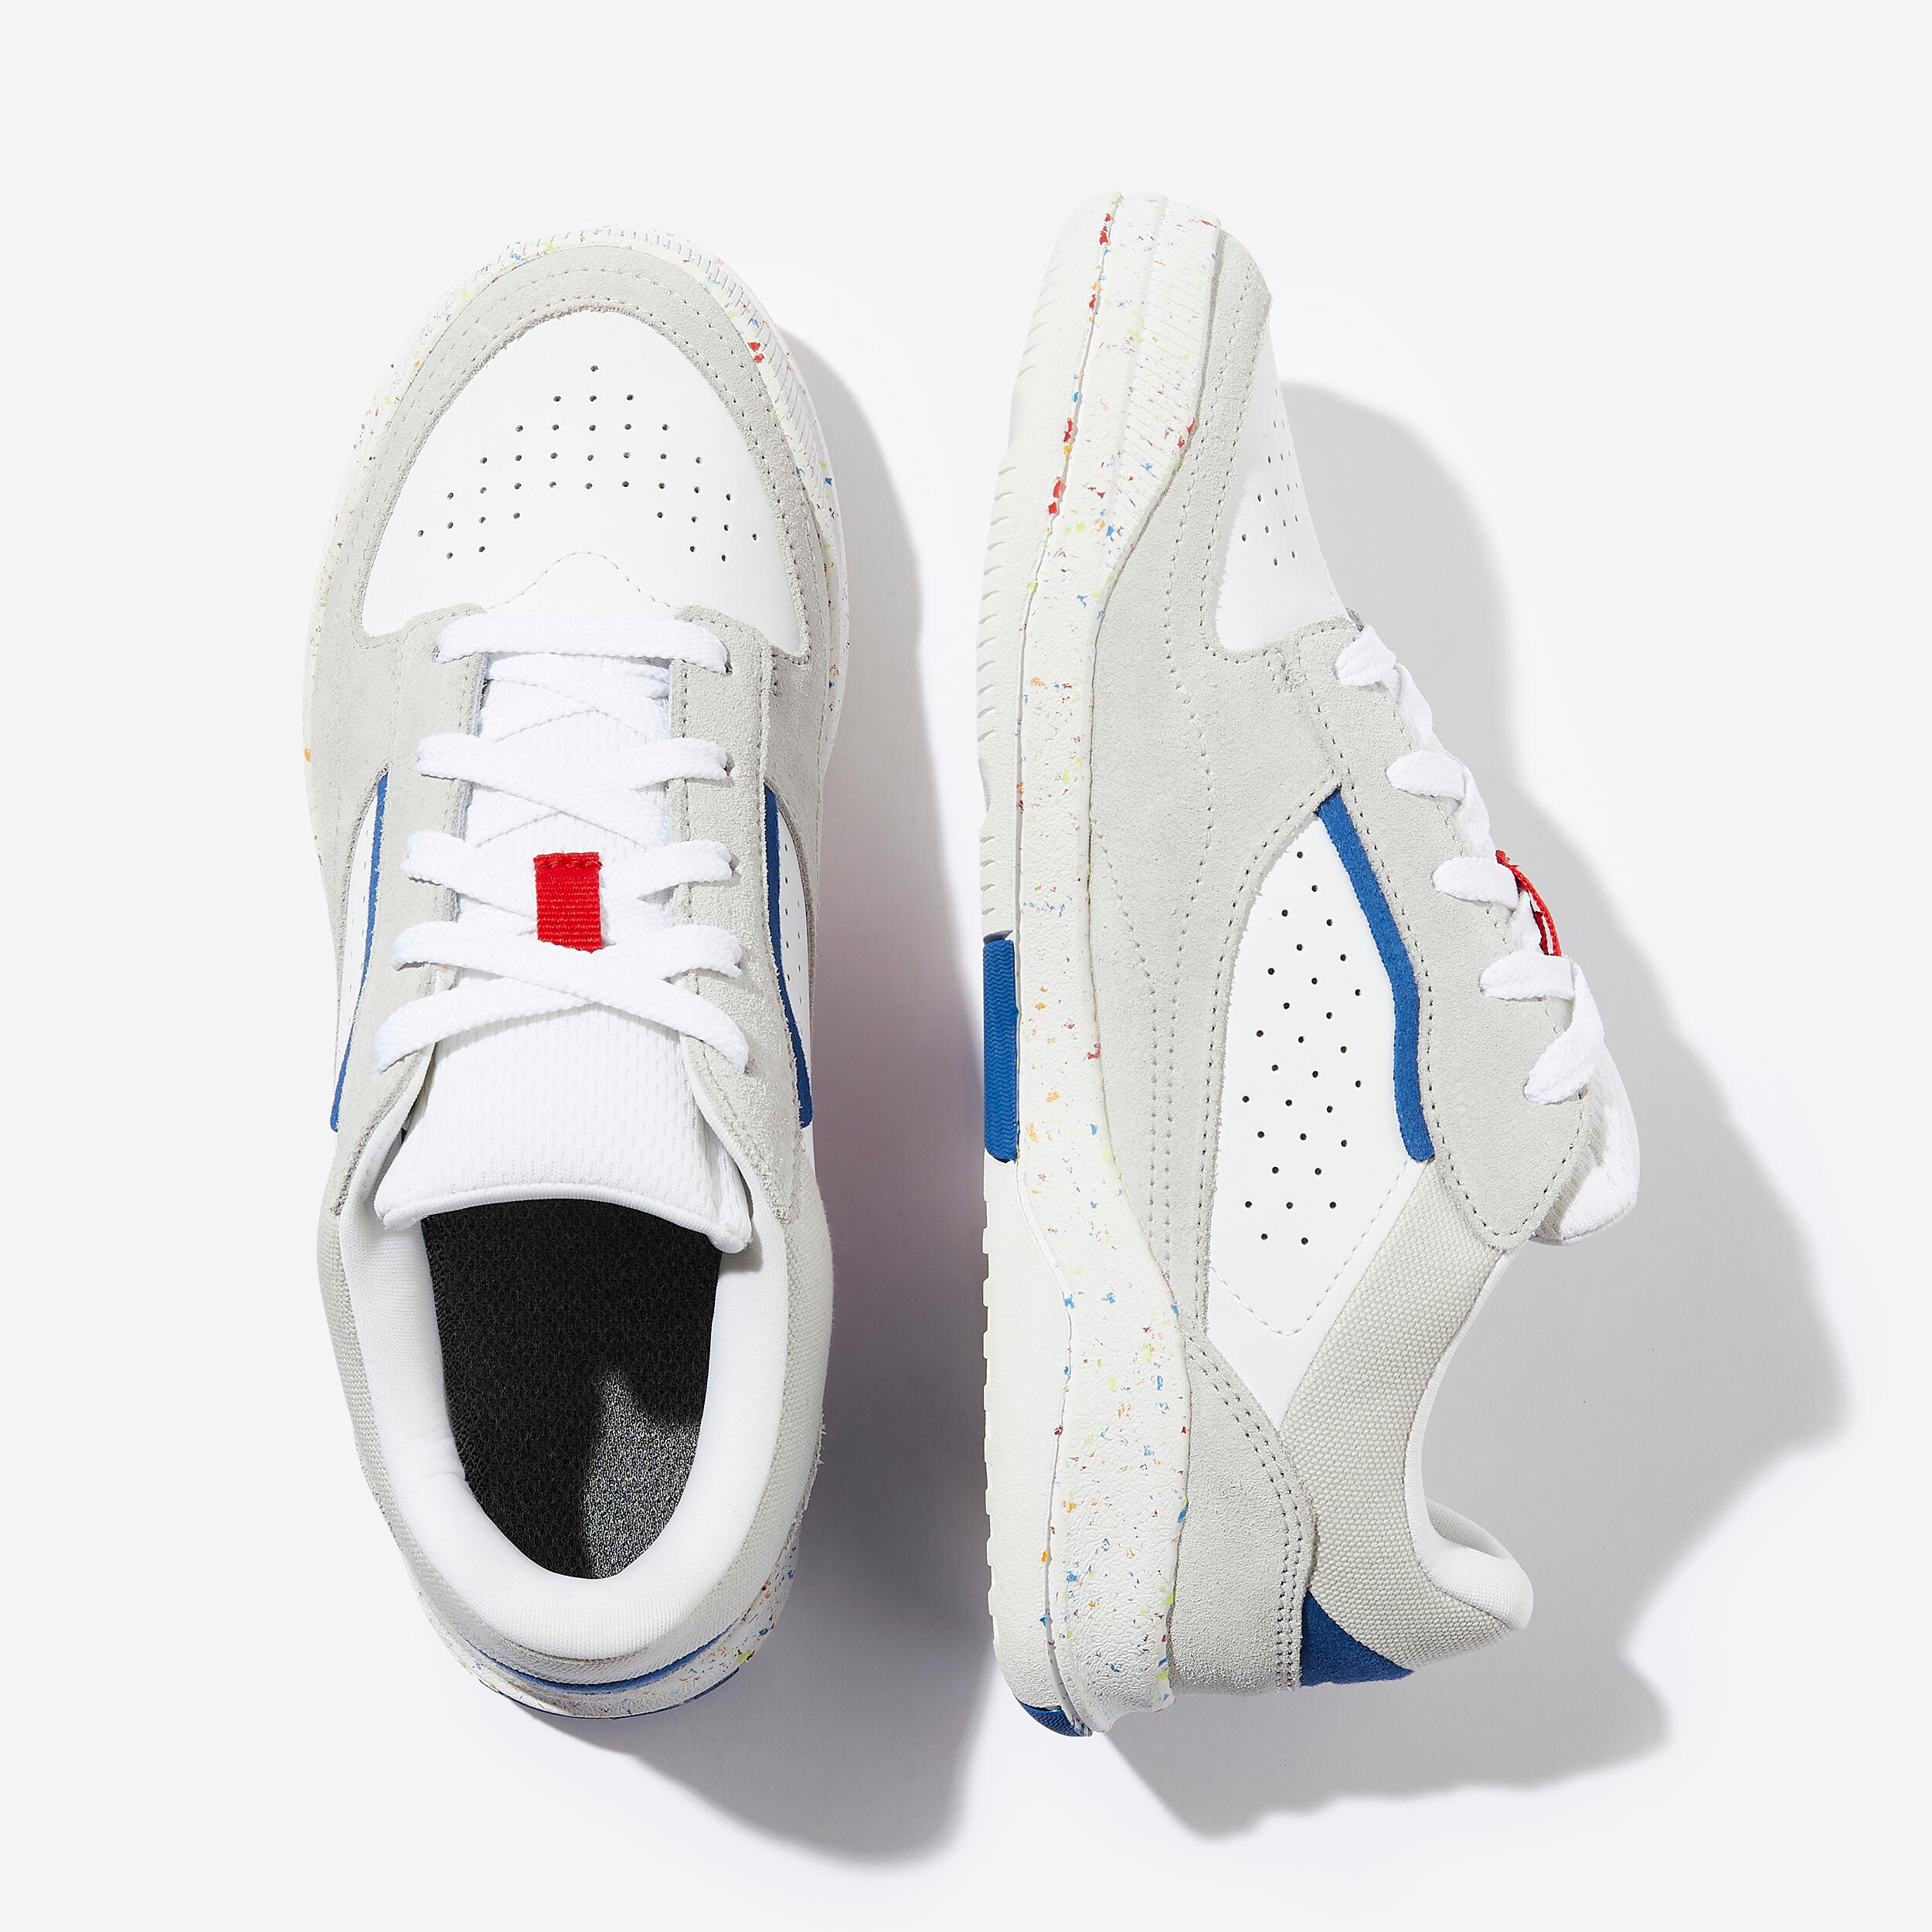 Kids' Lace-Up Shoes Playventure City - White/Blue/Red 8/10